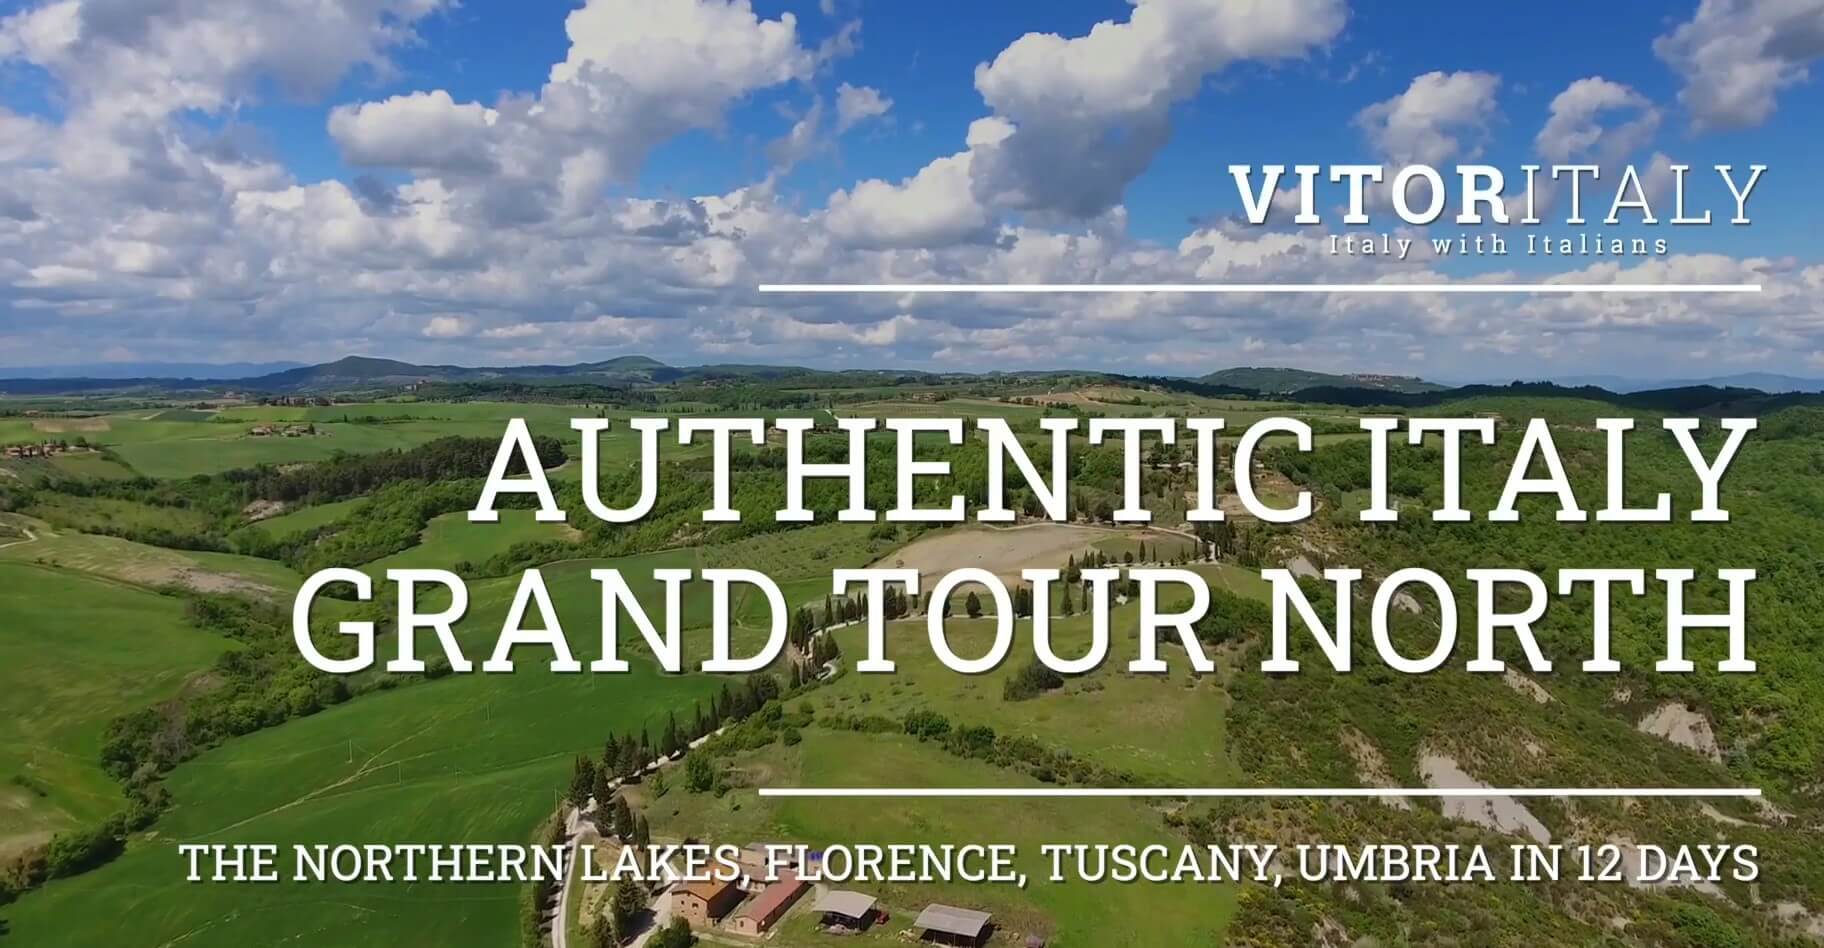 AUTHENTIC ITALY PRIVATE LUXURY TOUR NORTH - The Northern Lakes, Emilia, Tuscany, Umbria